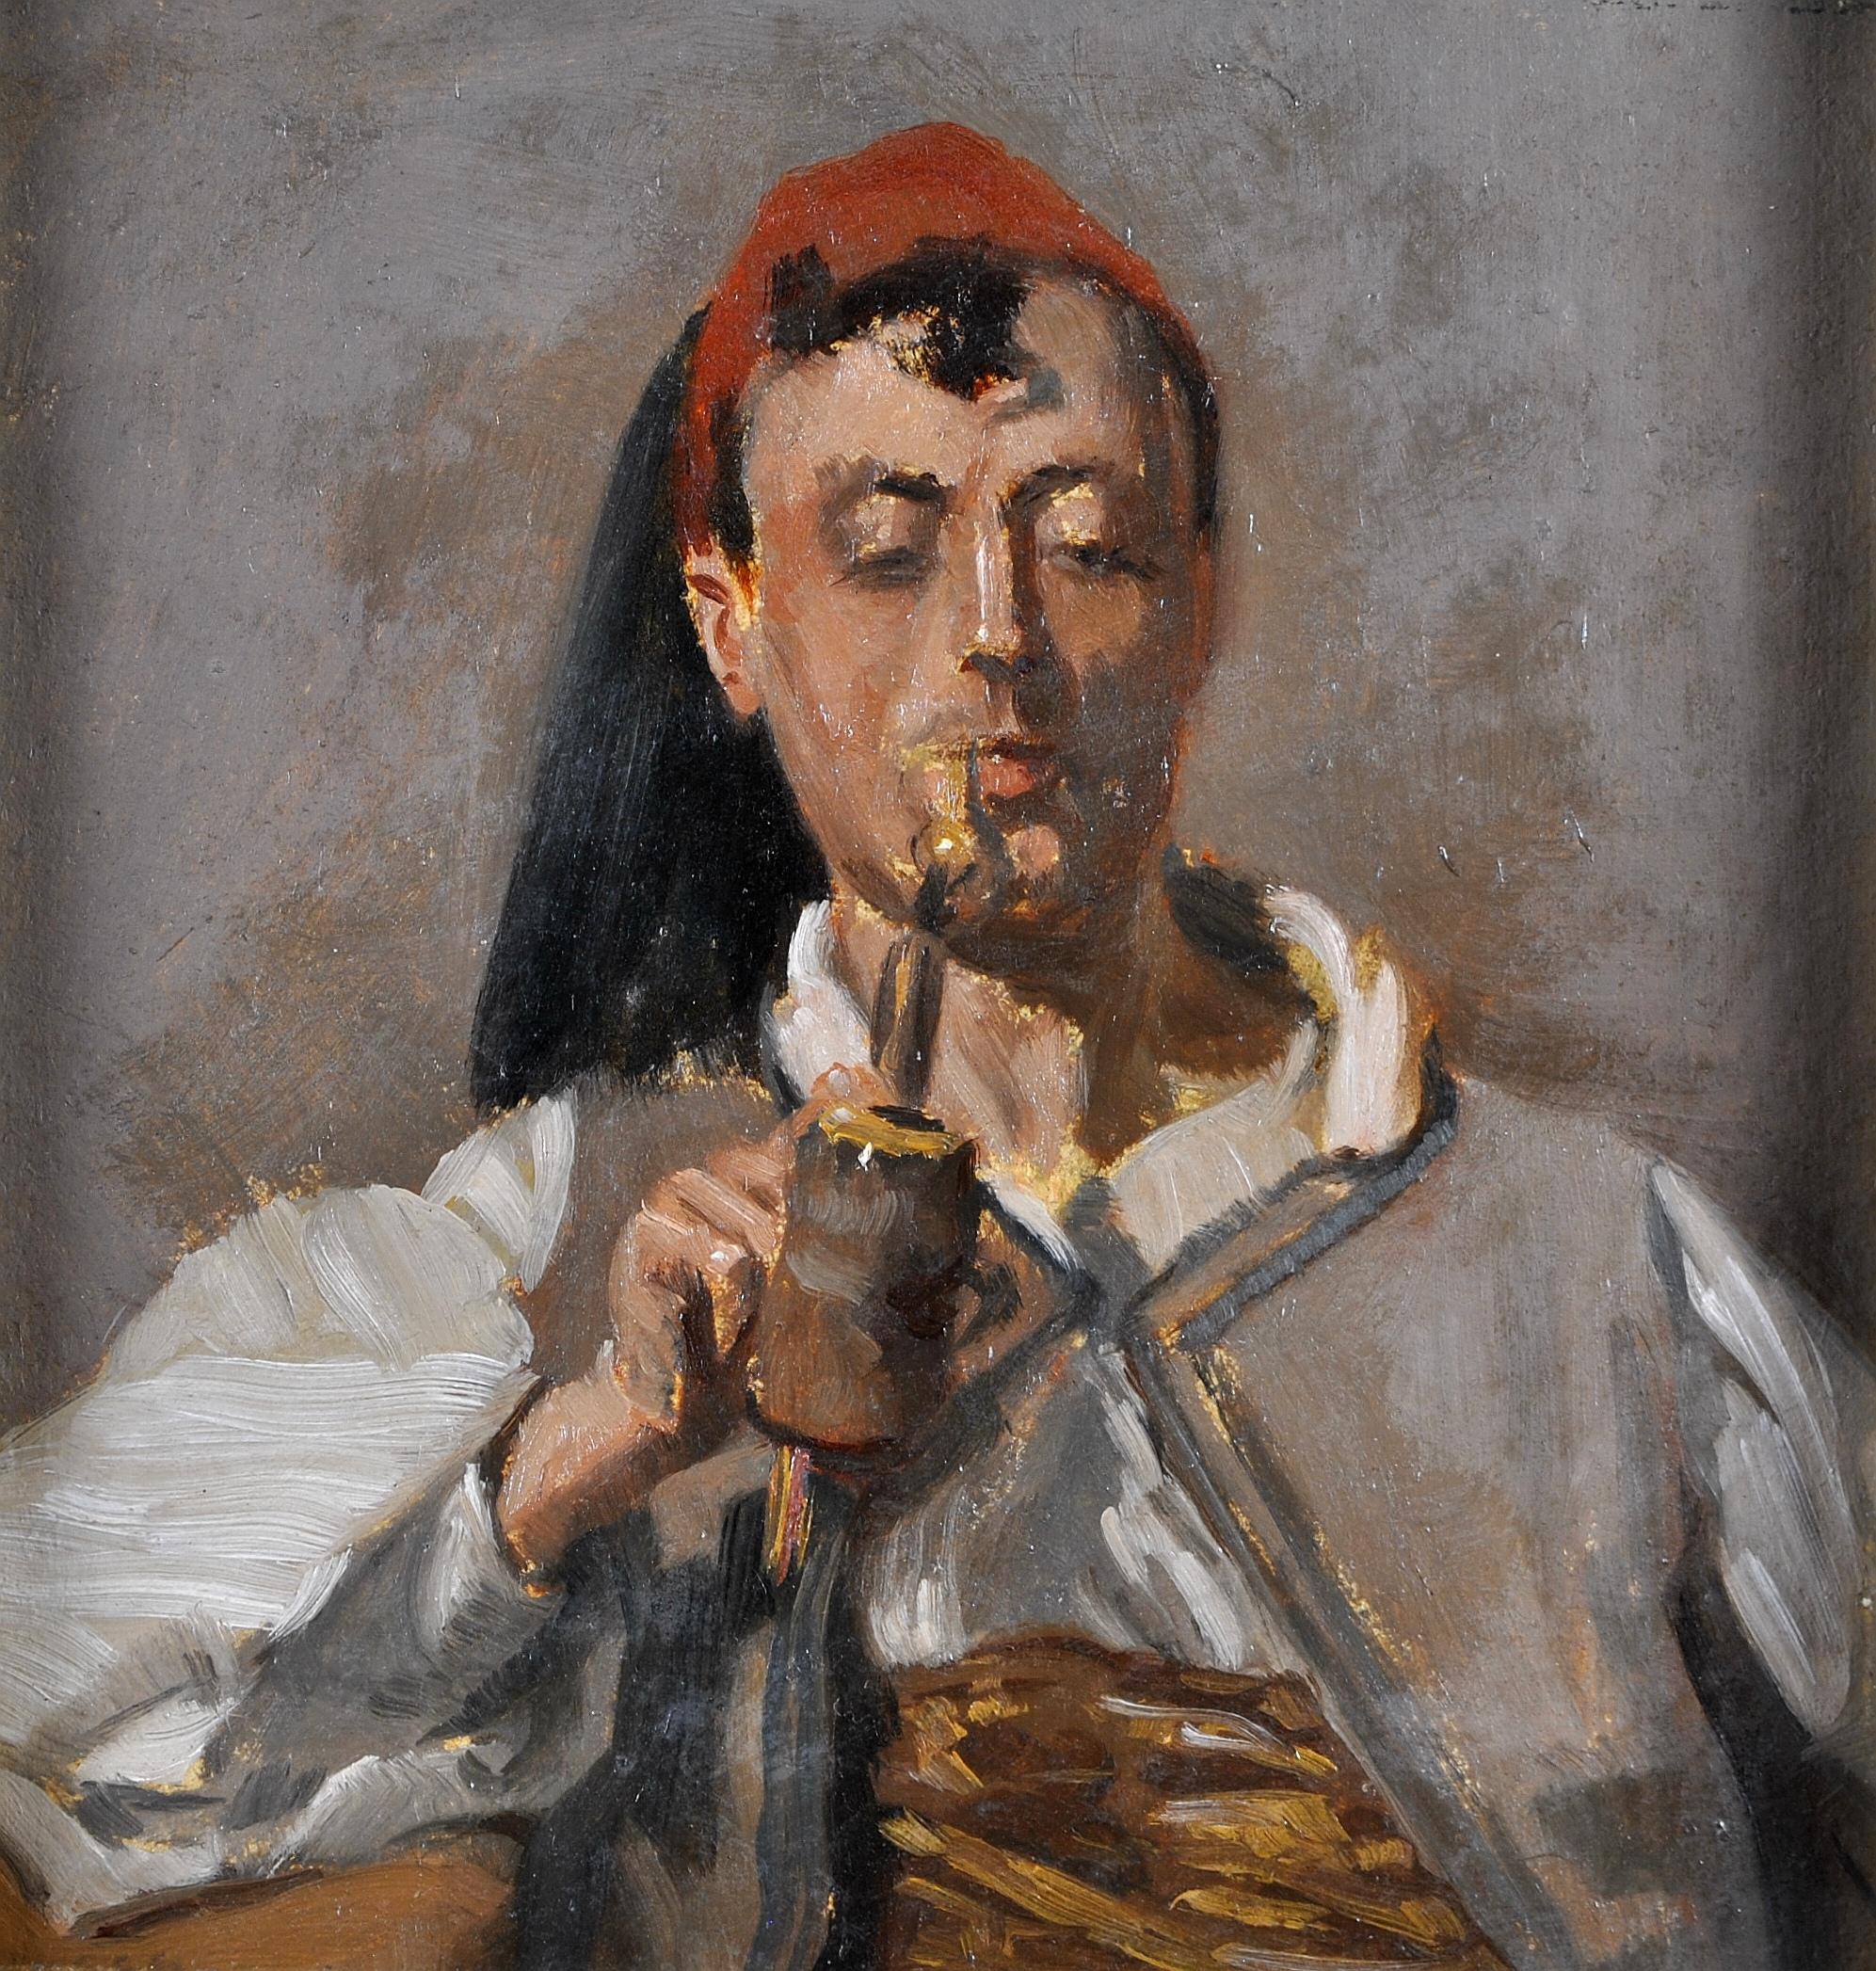 North African Man Smoking a Pipe - Antique British Orientalist Portrait Painting For Sale 1